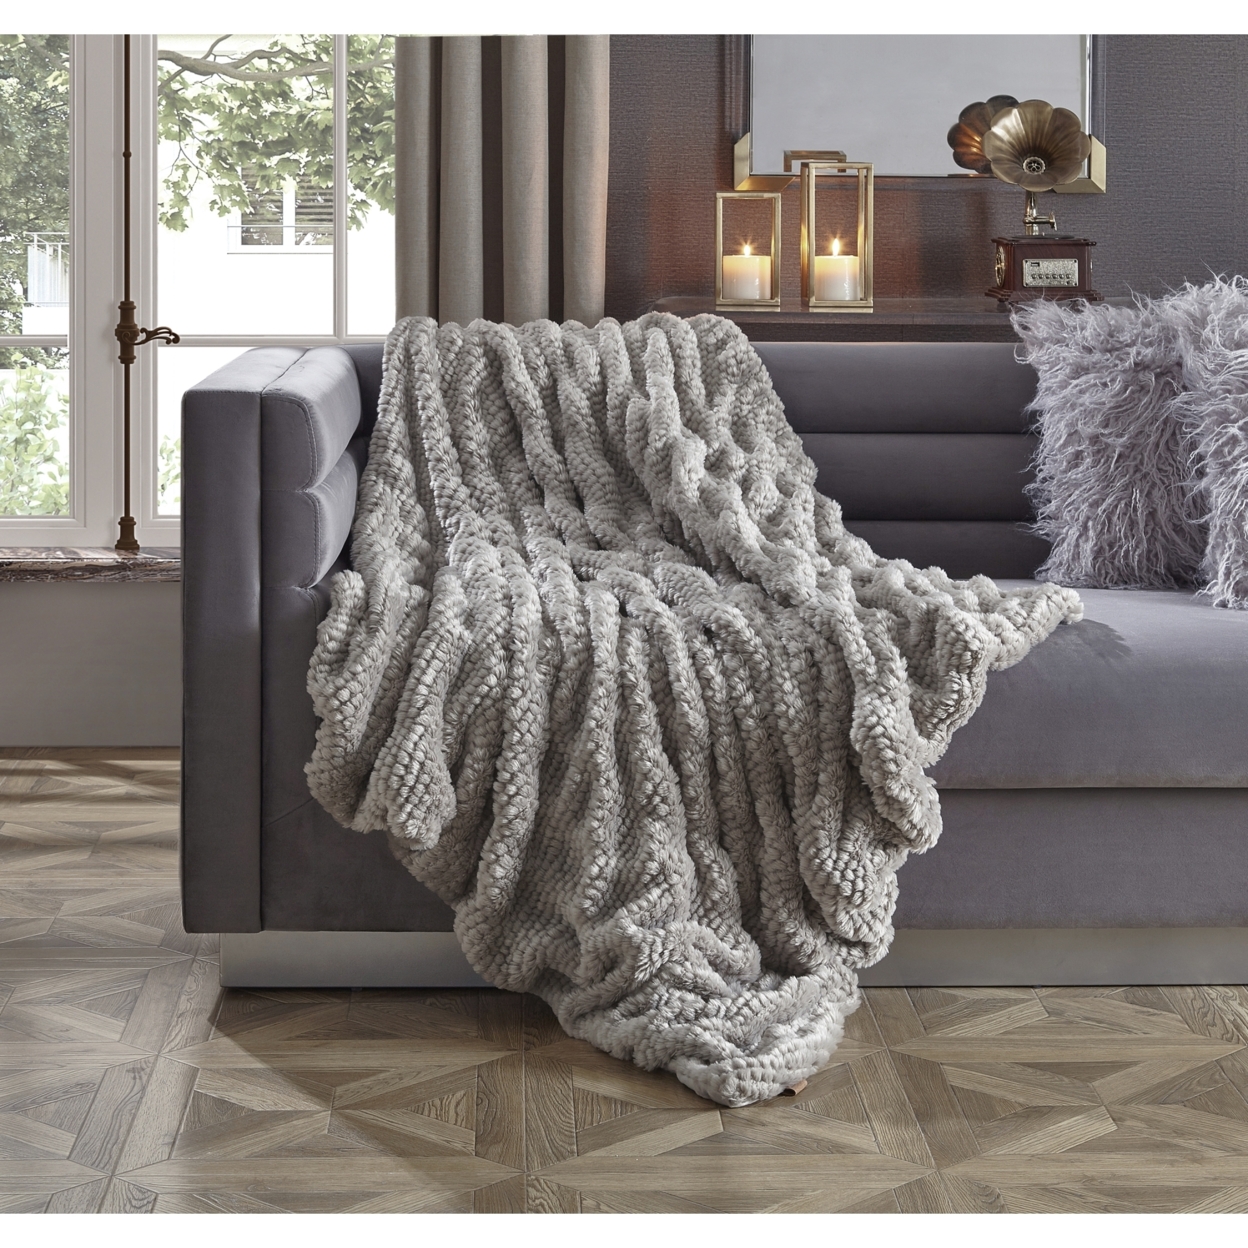 Noelia Throw-Extra Soft, Silk Touch-Honeycomb Texture-Exceptionally Cozy - Ivory